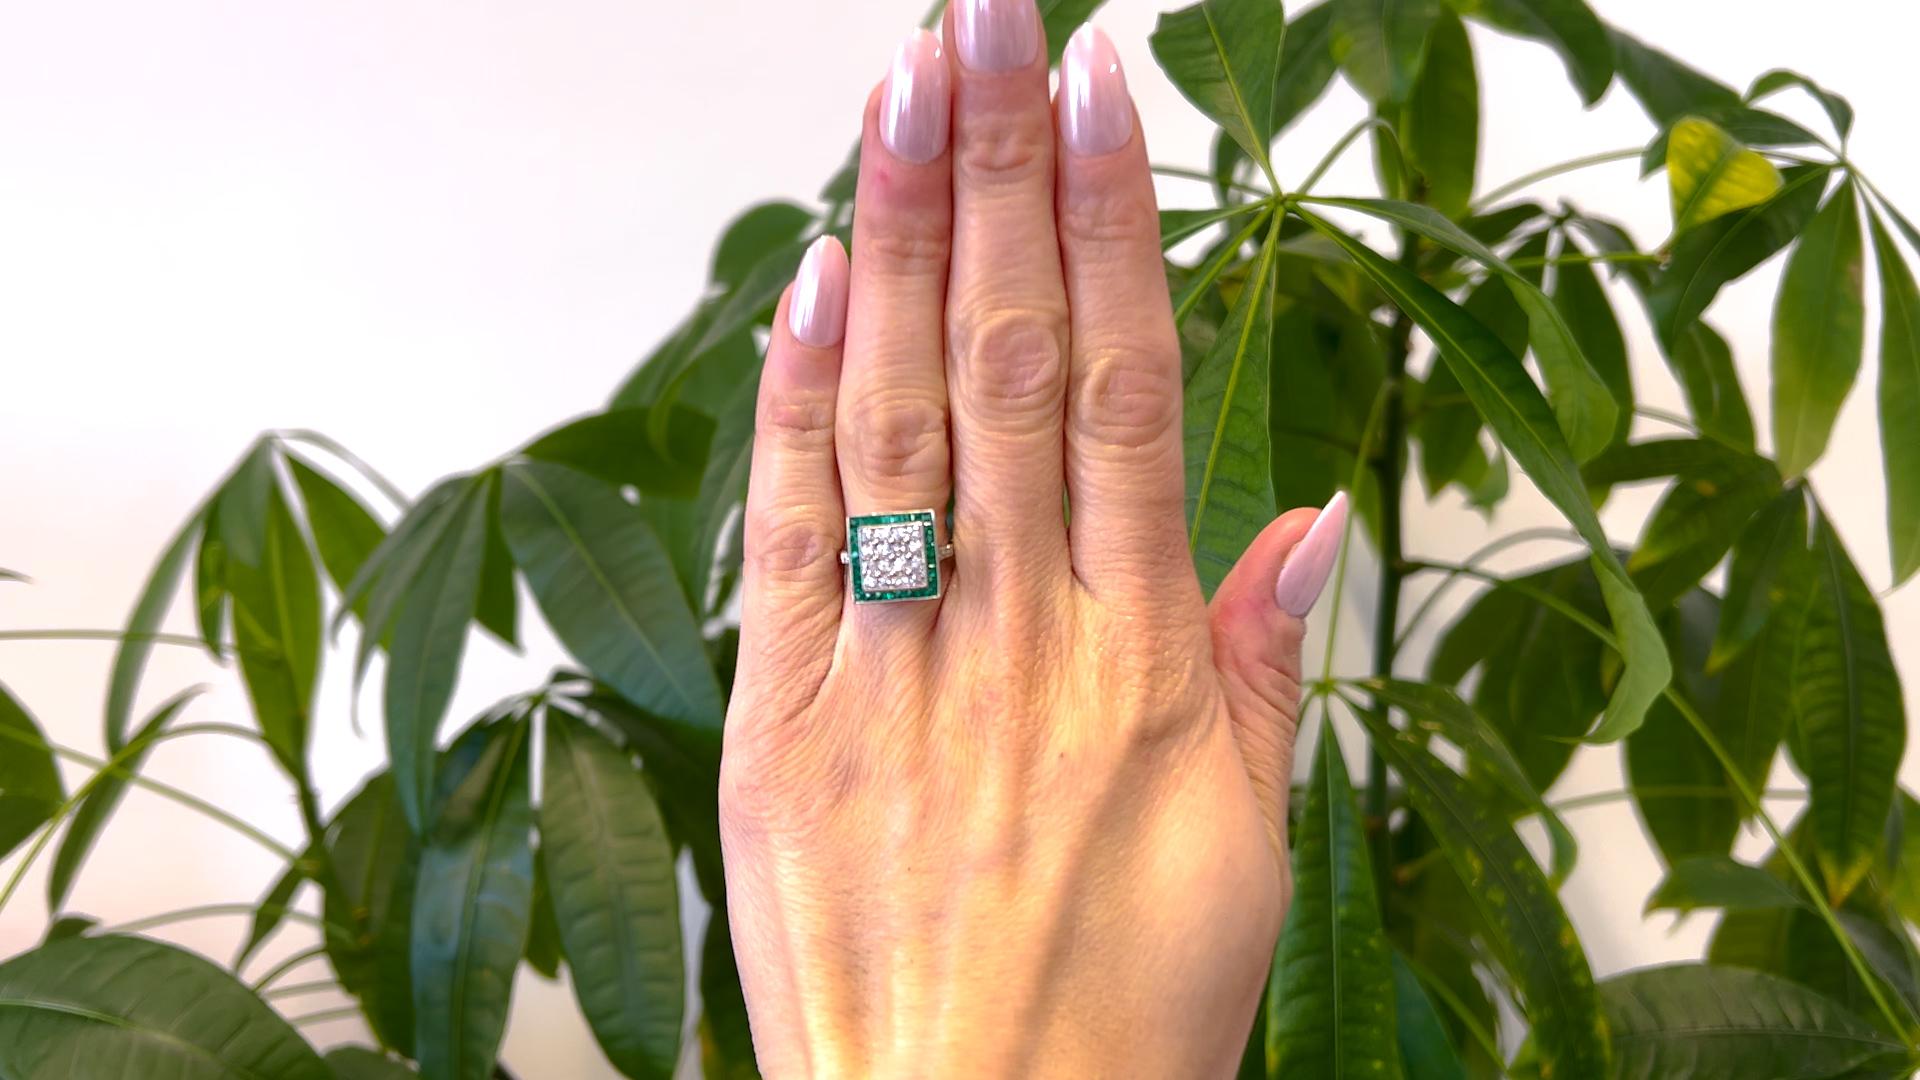 One Art Deco Inspired Diamond and Emerald Platinum Square Ring. Featuring 16 old mine cut diamonds with a total weight of approximately 1.20 carats, graded near-colorless, VS clarity. Accented by 32 French cut emeralds with a total weight of